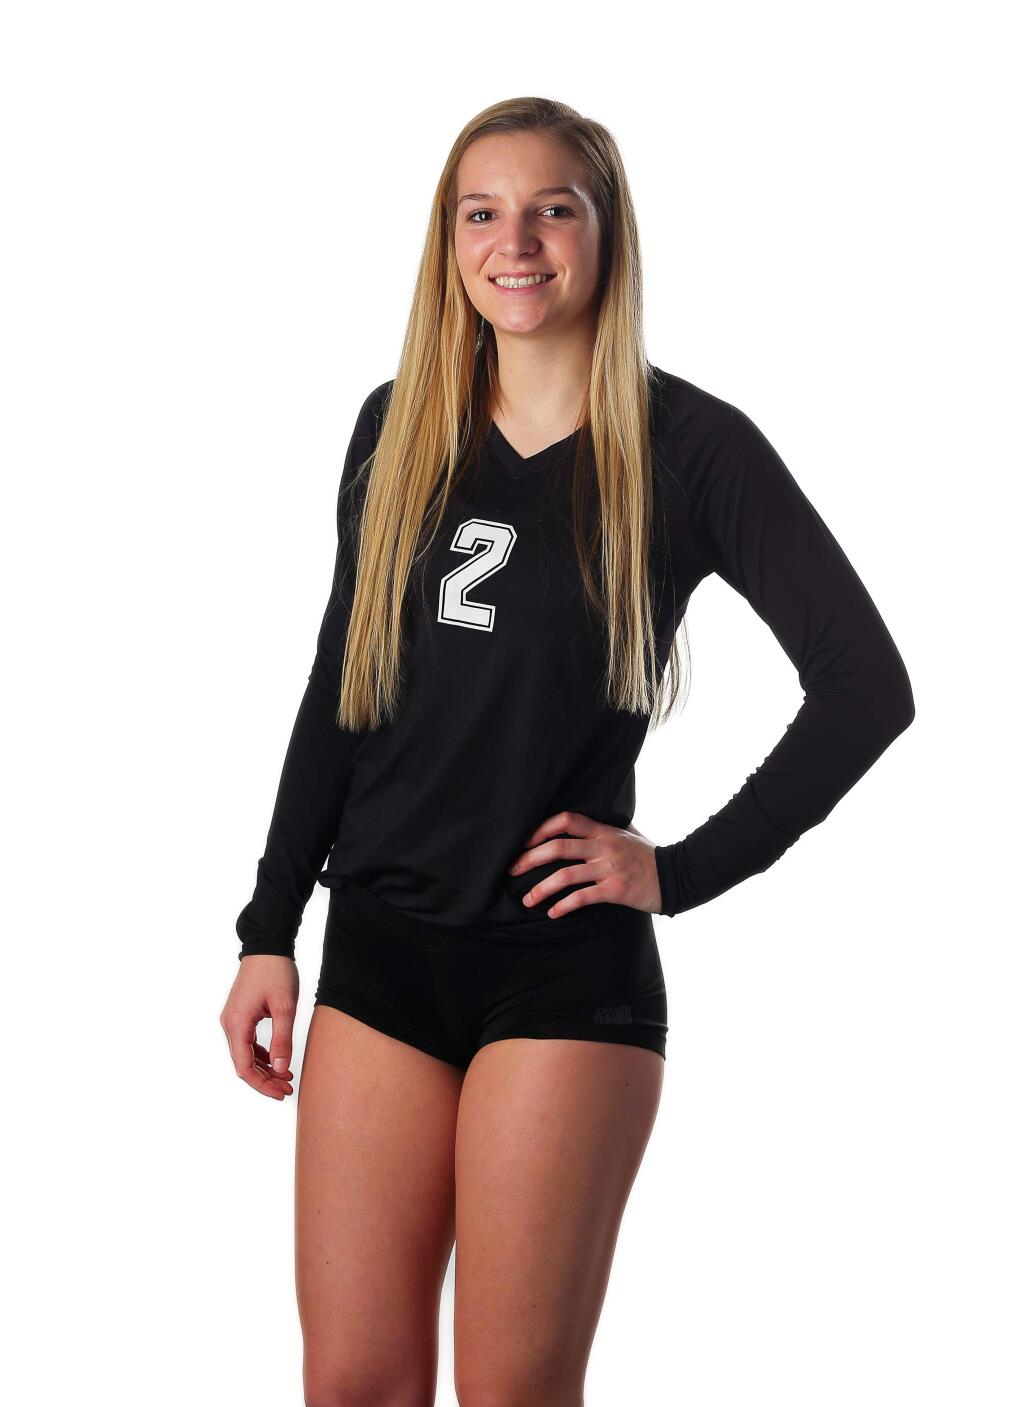 Sonoma Valley's Jenna Mak, All-Empire Volleyball Player of the Year. (Christopher Chung / The Press Democrat)